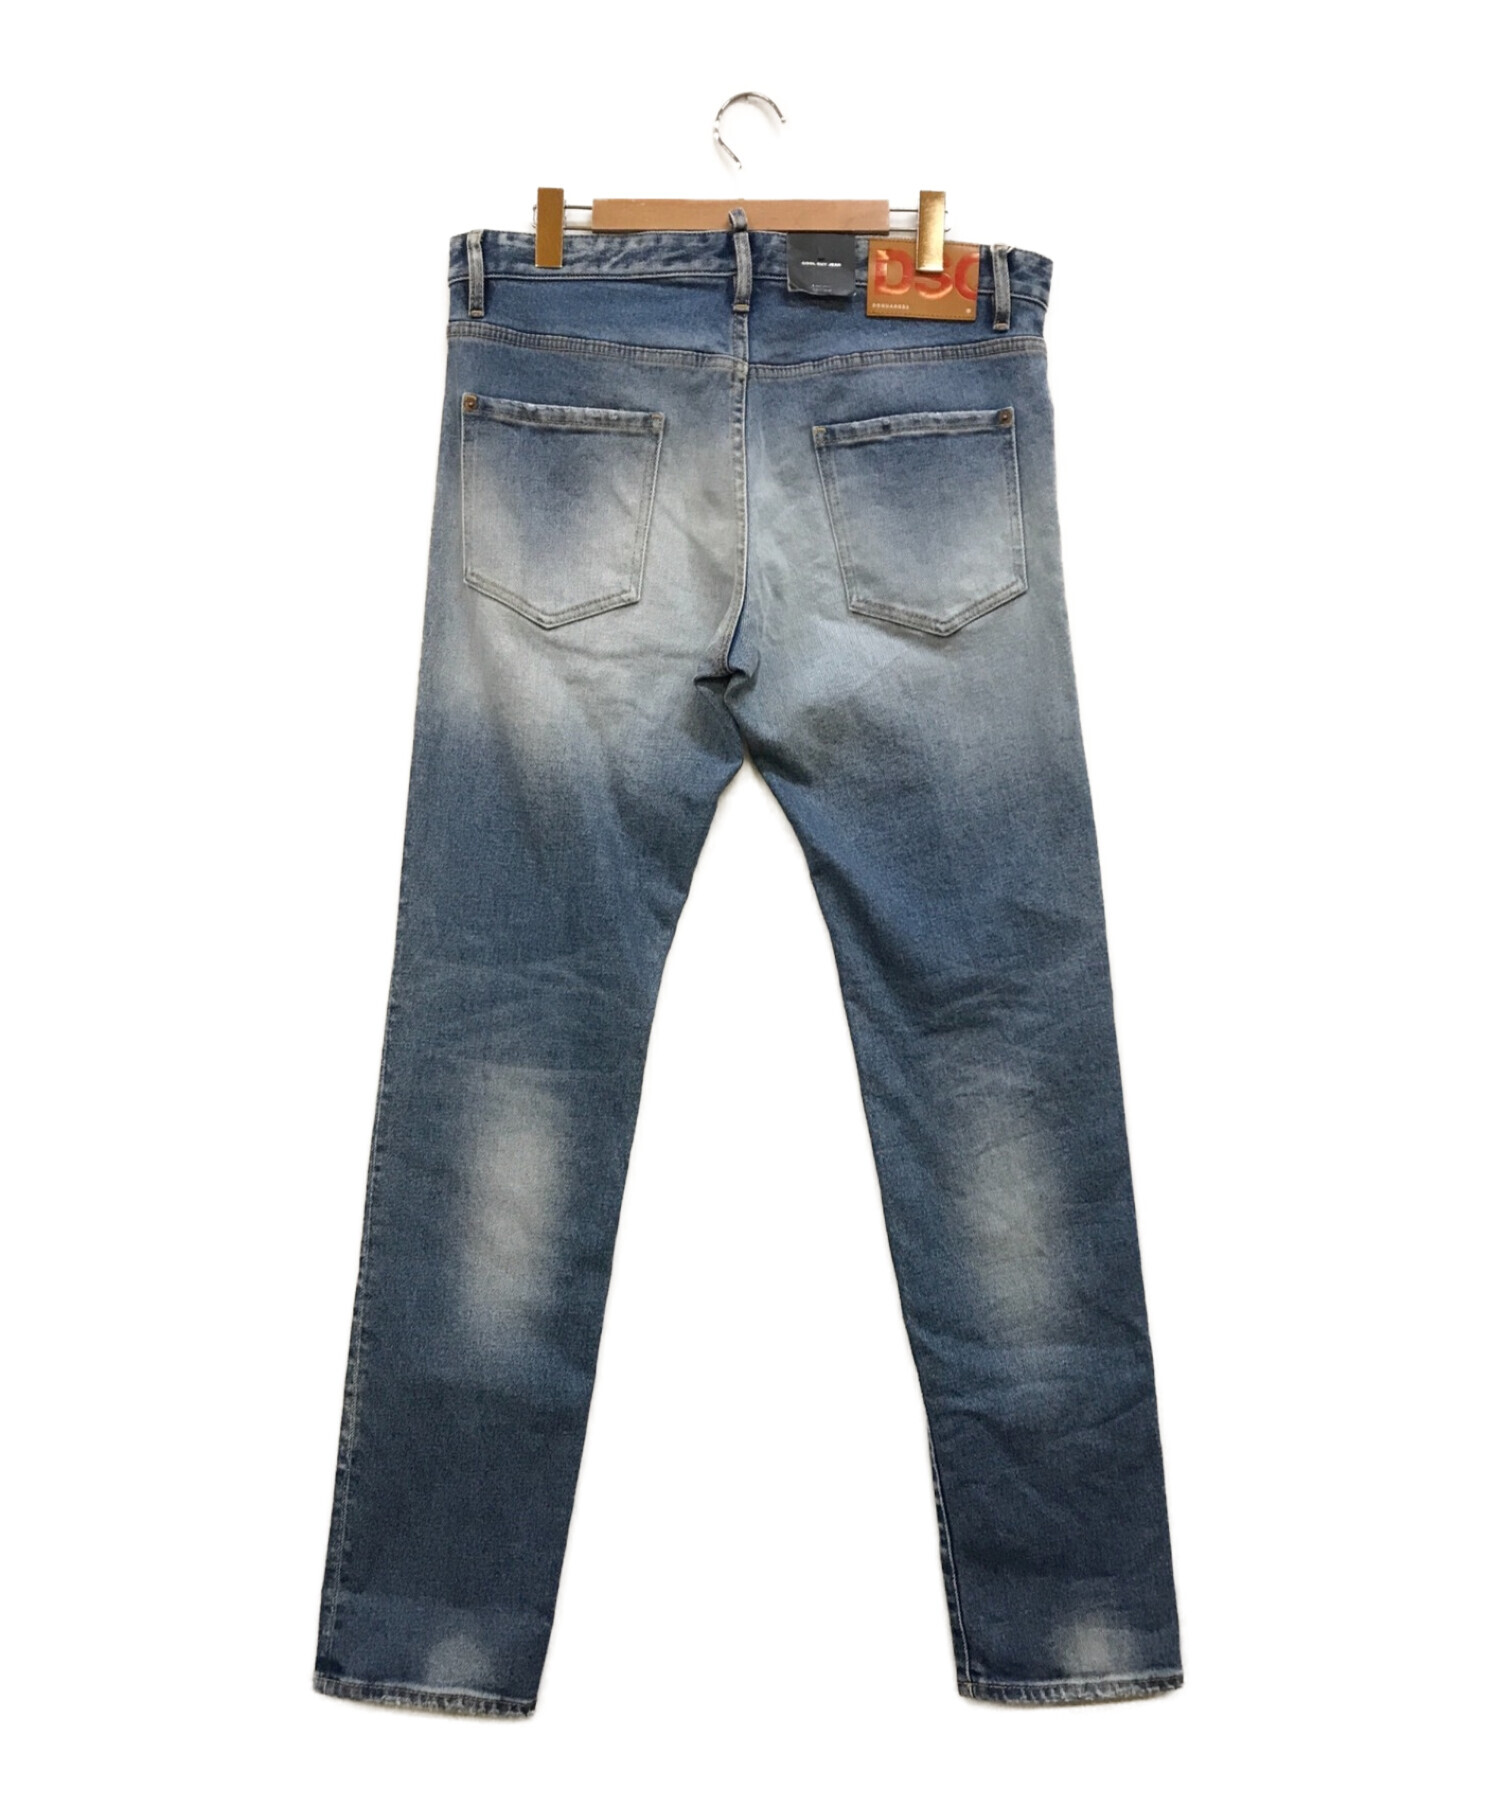 DSQUARED2 ディースクエアード COOL GUY JEAN 52-